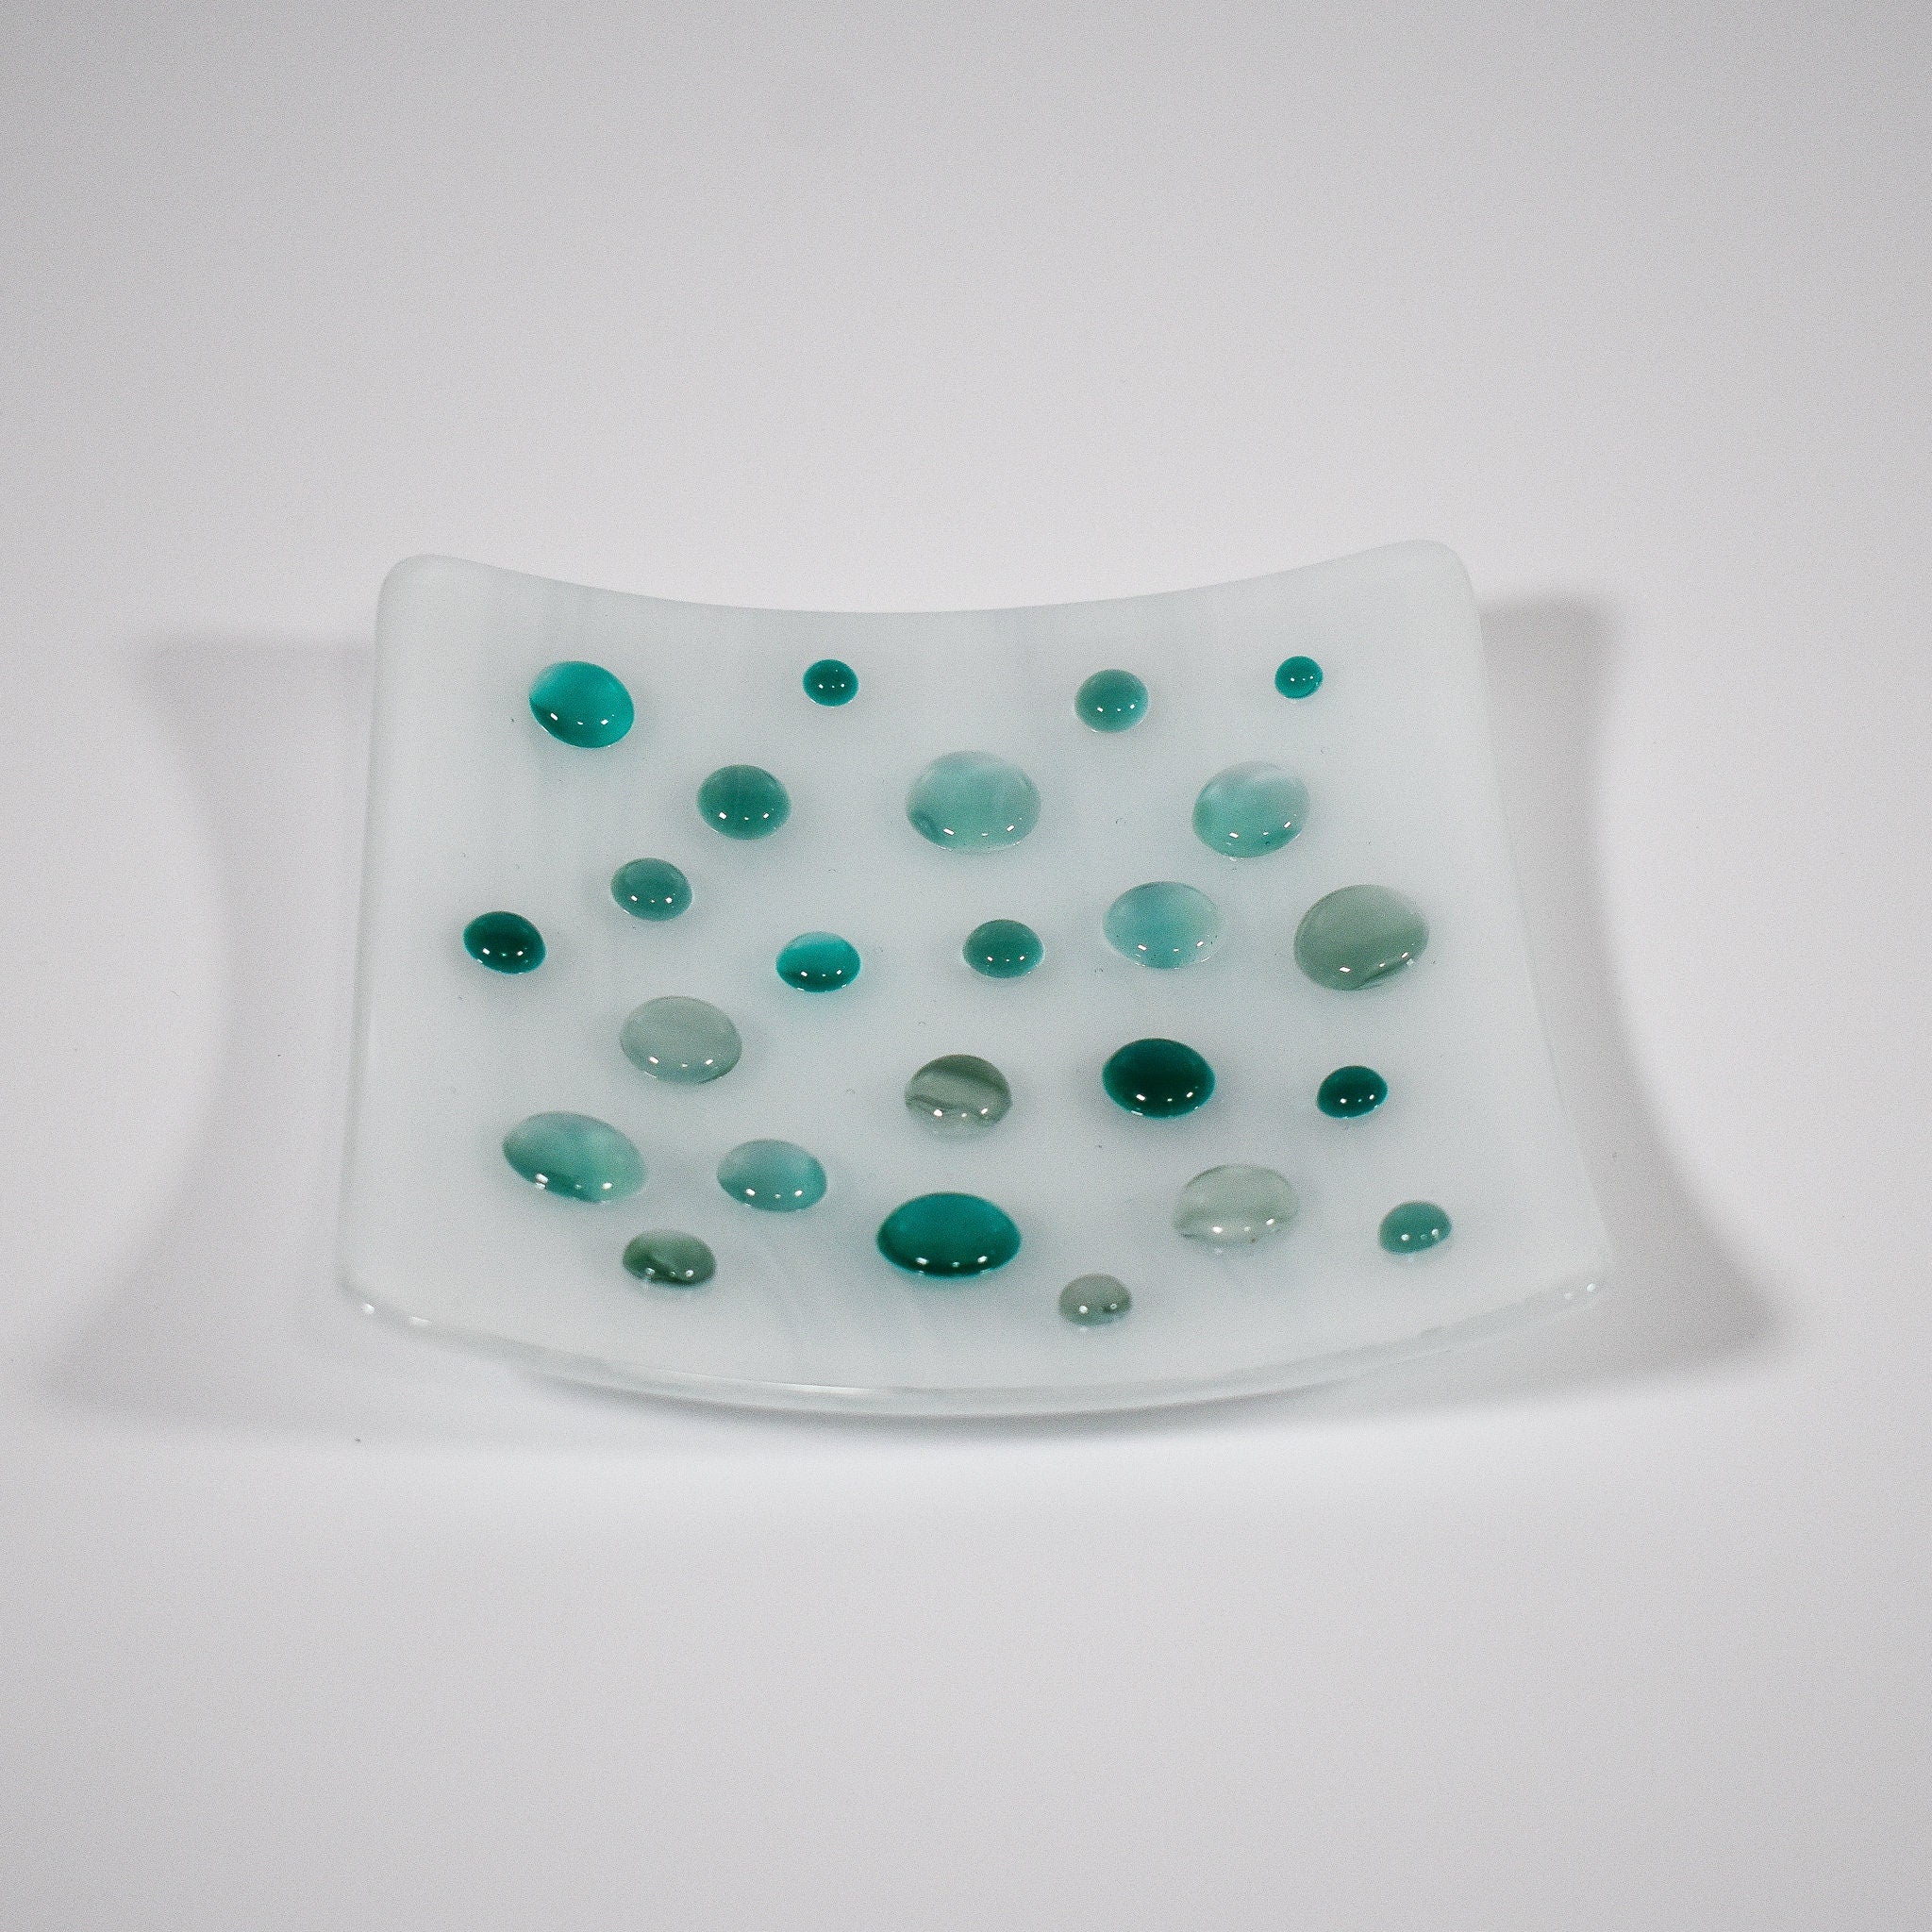 Pure White Catchall Tray with Teal Green Accents - Organize Small Items in Entry, Bath, Bedroom or Kitchen